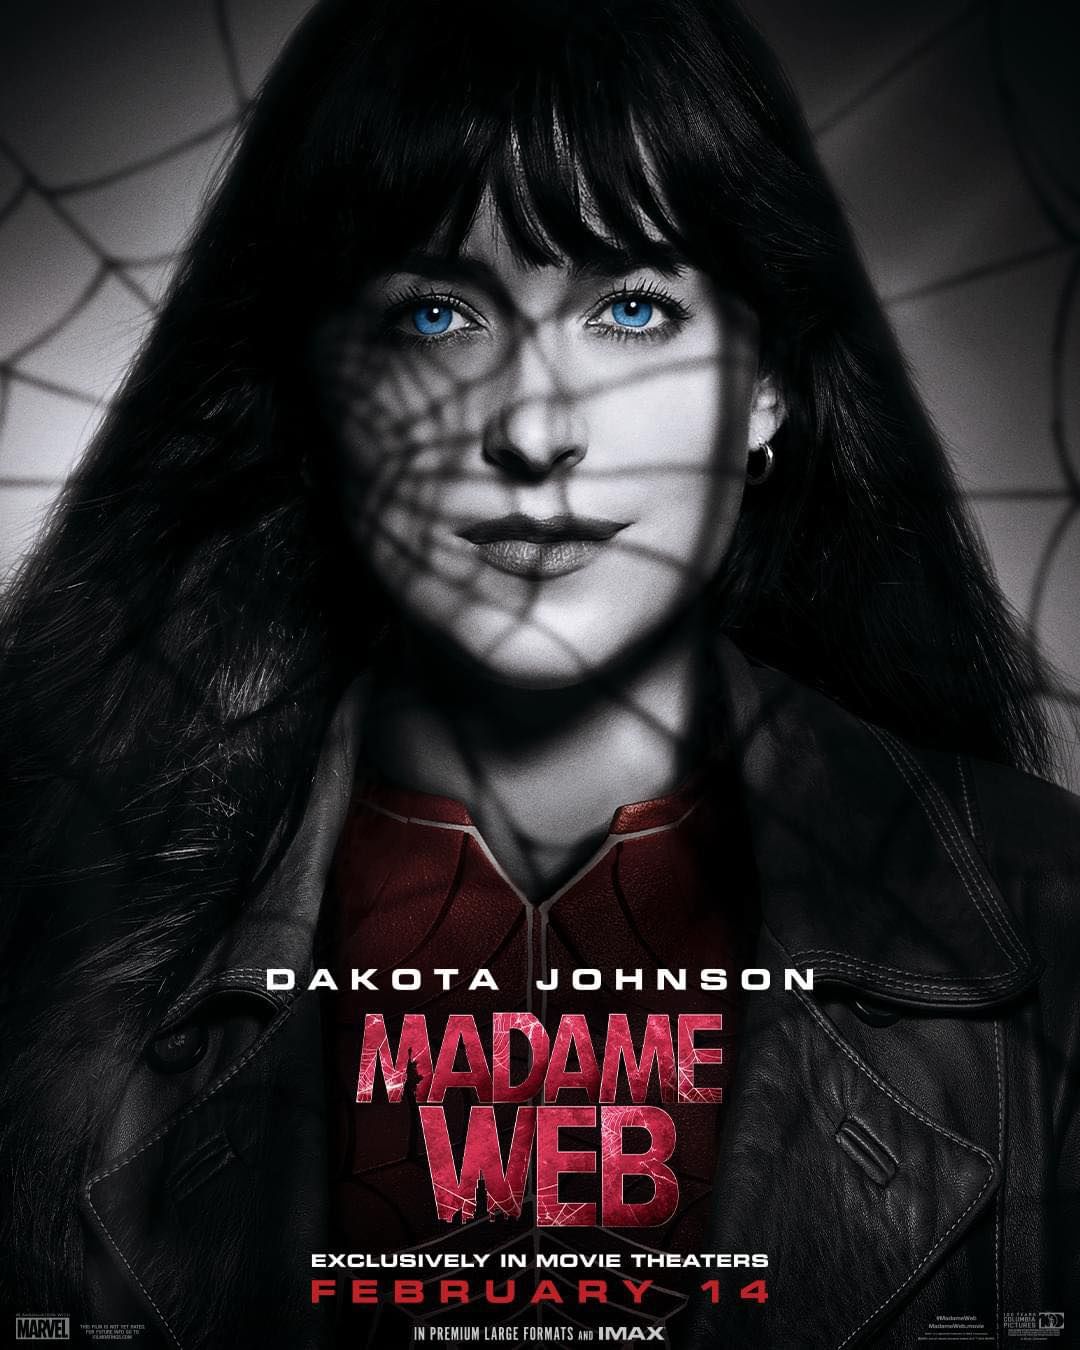 Madame Web” Characters Unmasked In New Superhero Posters